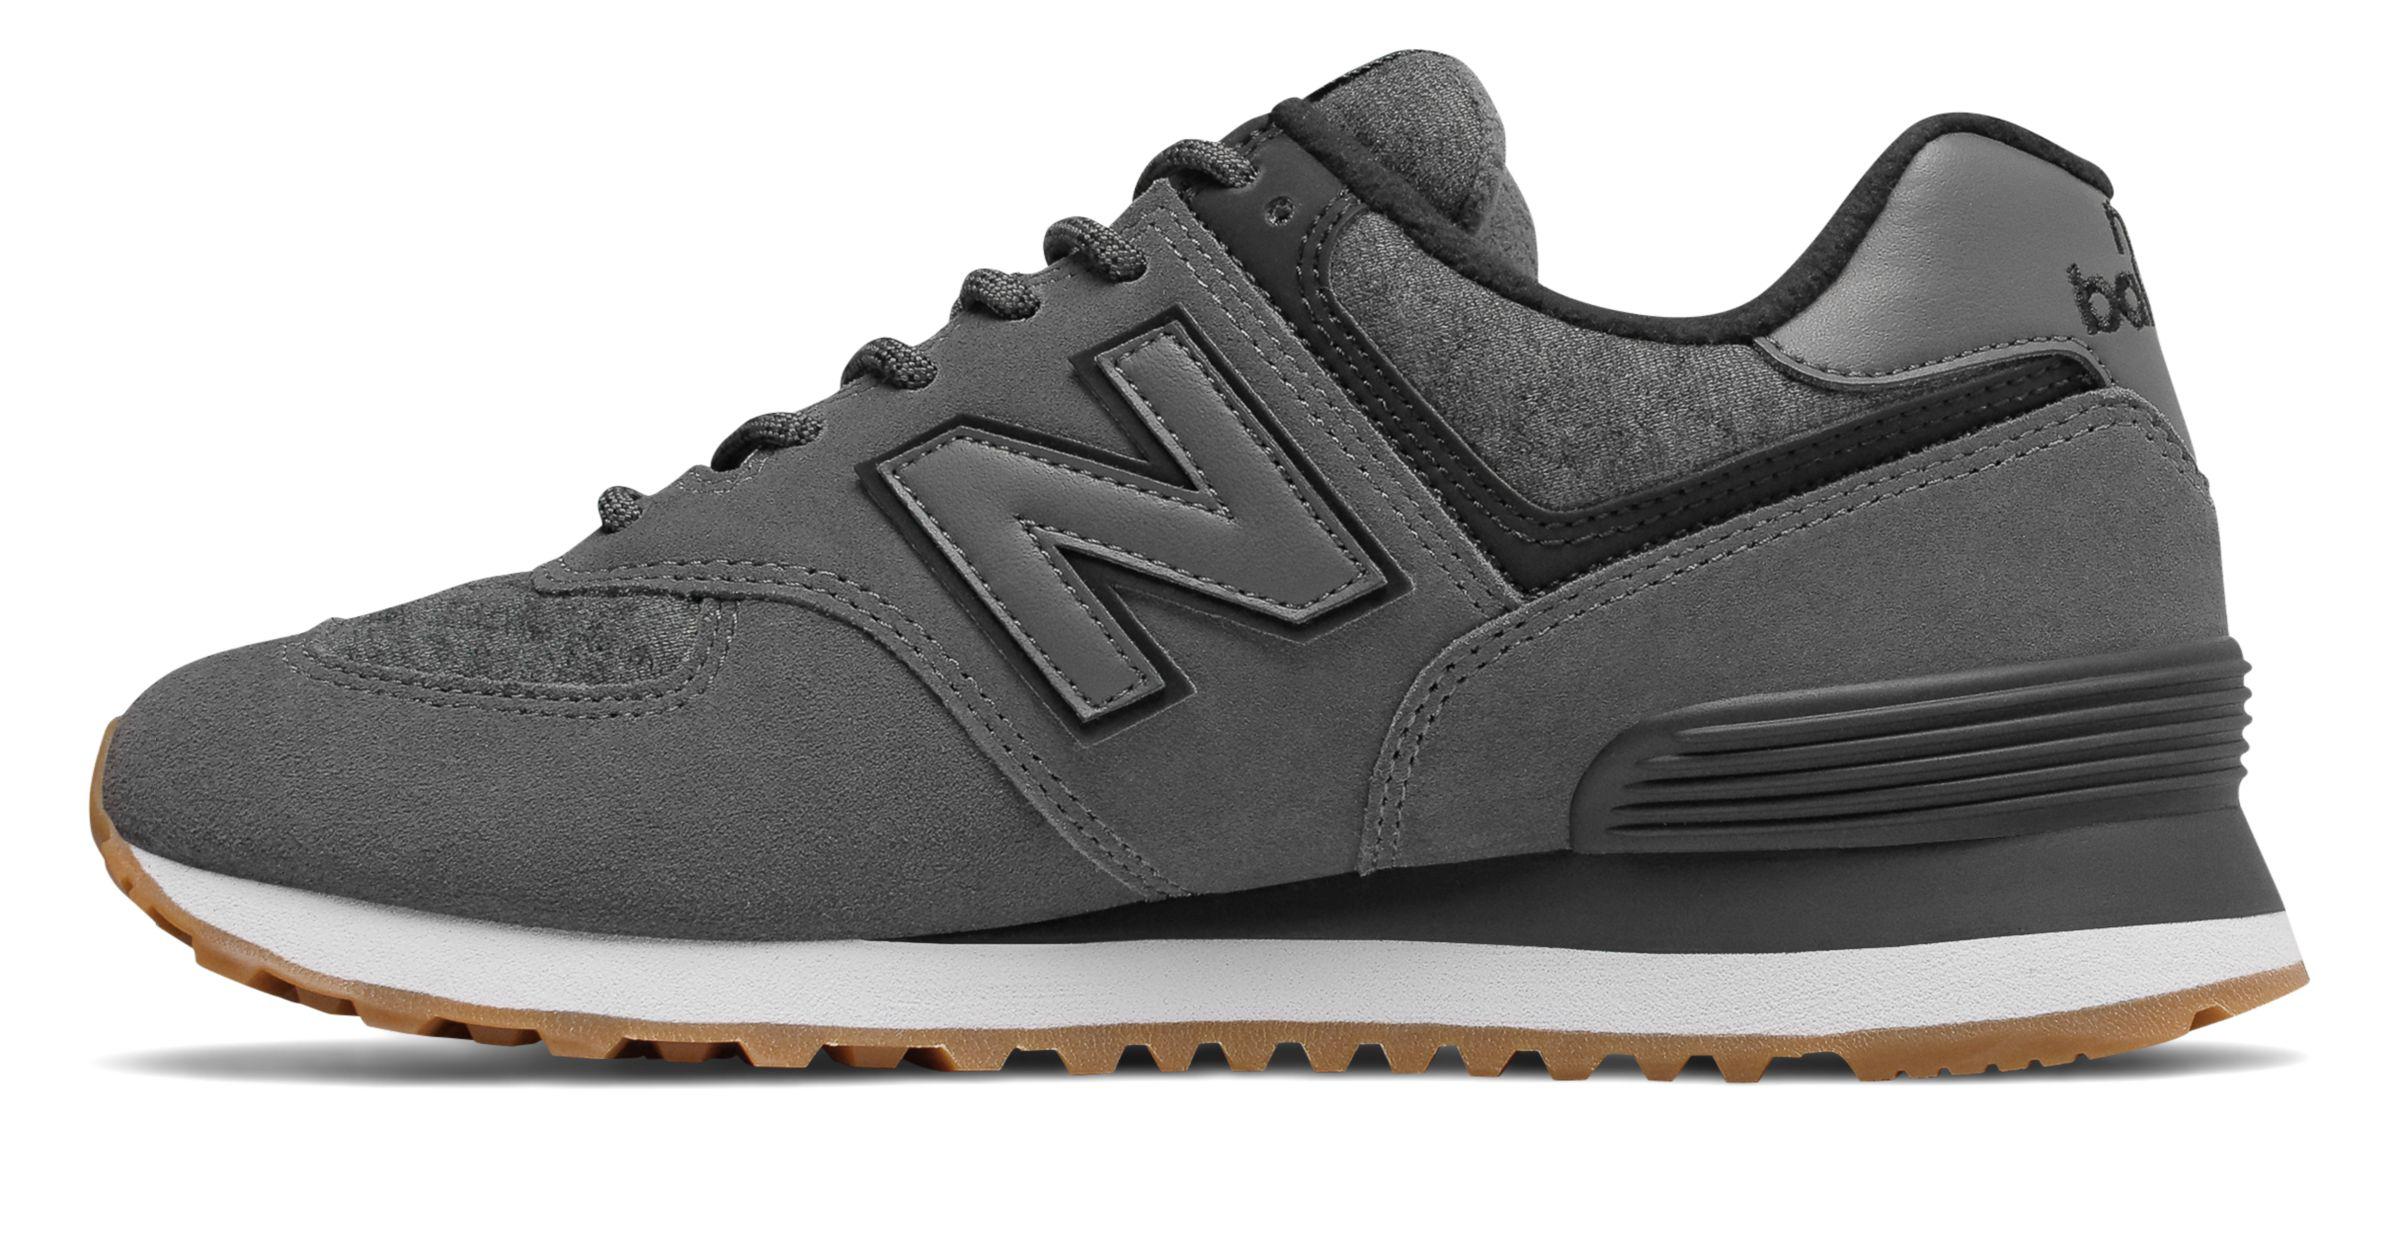 New Balance Suede 574 Winter Quilt in 